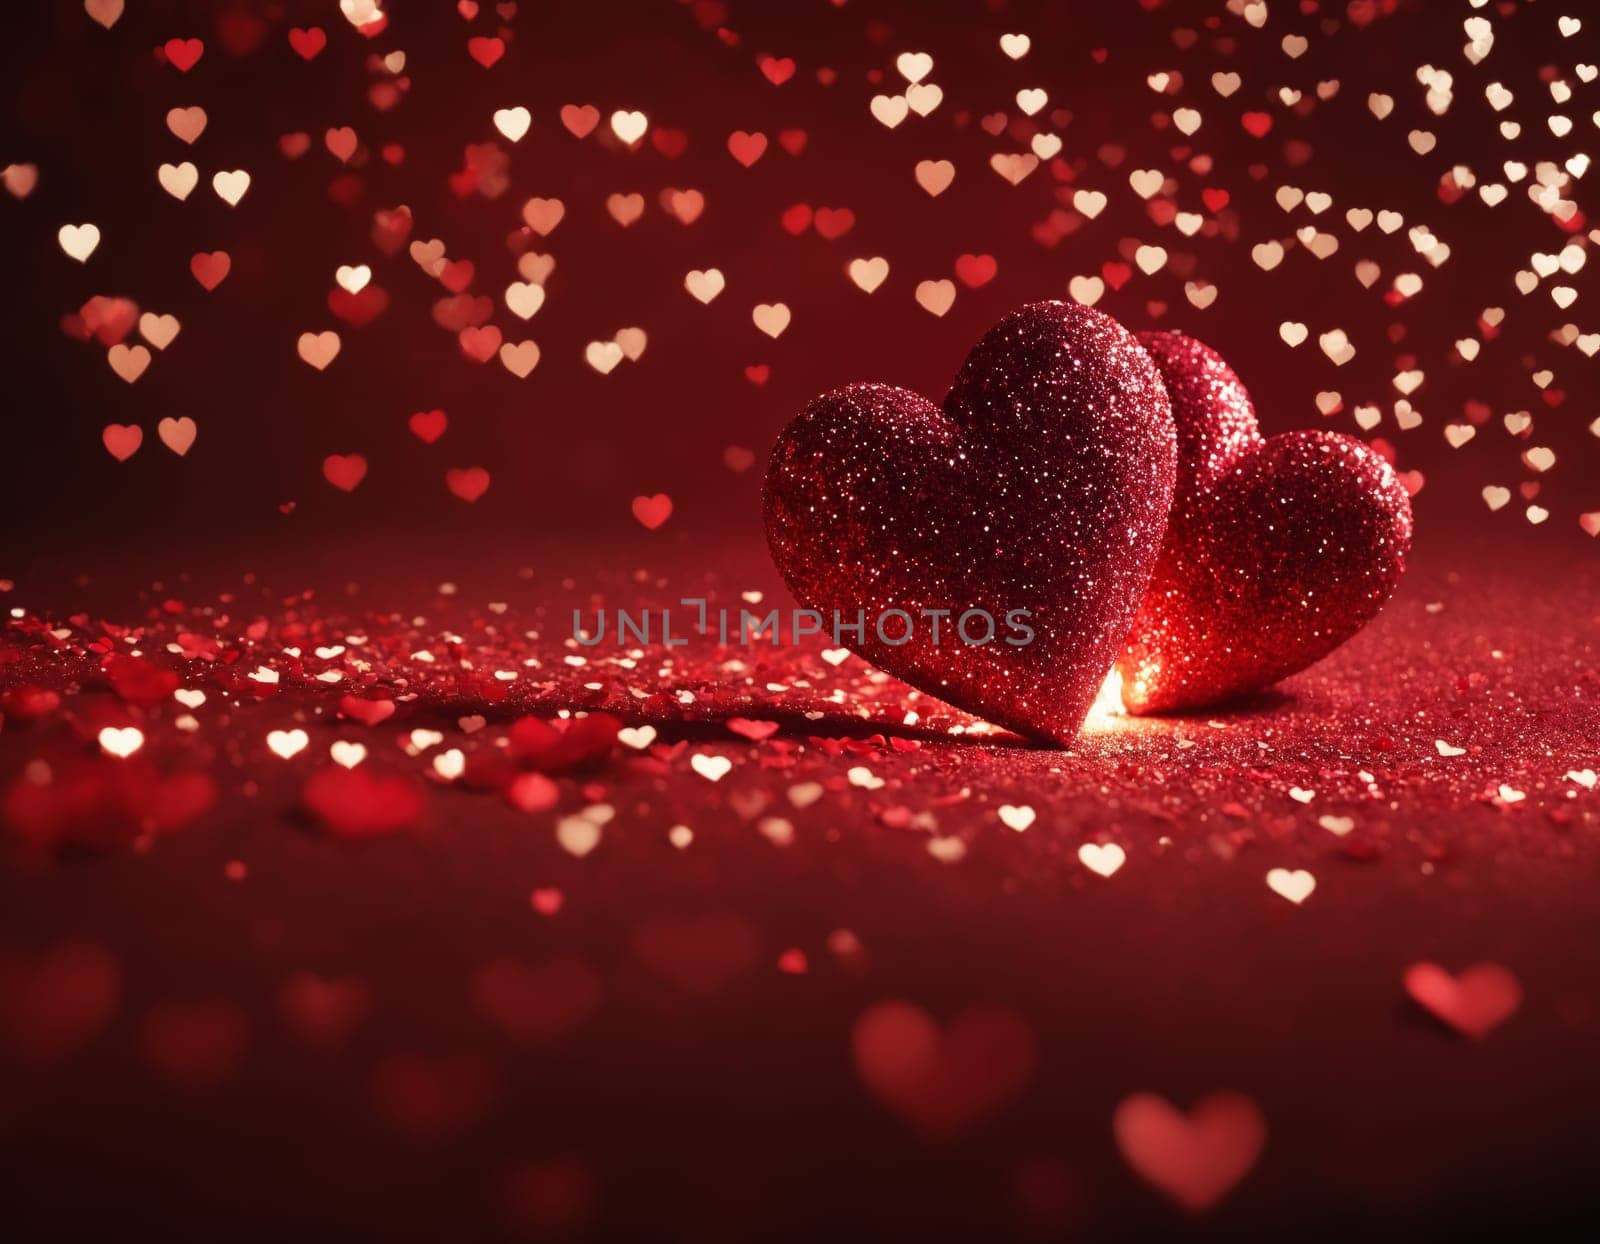 Glistening hearts rest amidst a shower of smaller heart shapes. The radiant glow and the deep red hue evoke a sense of warmth and affection. Ideal for expressing love and romance.